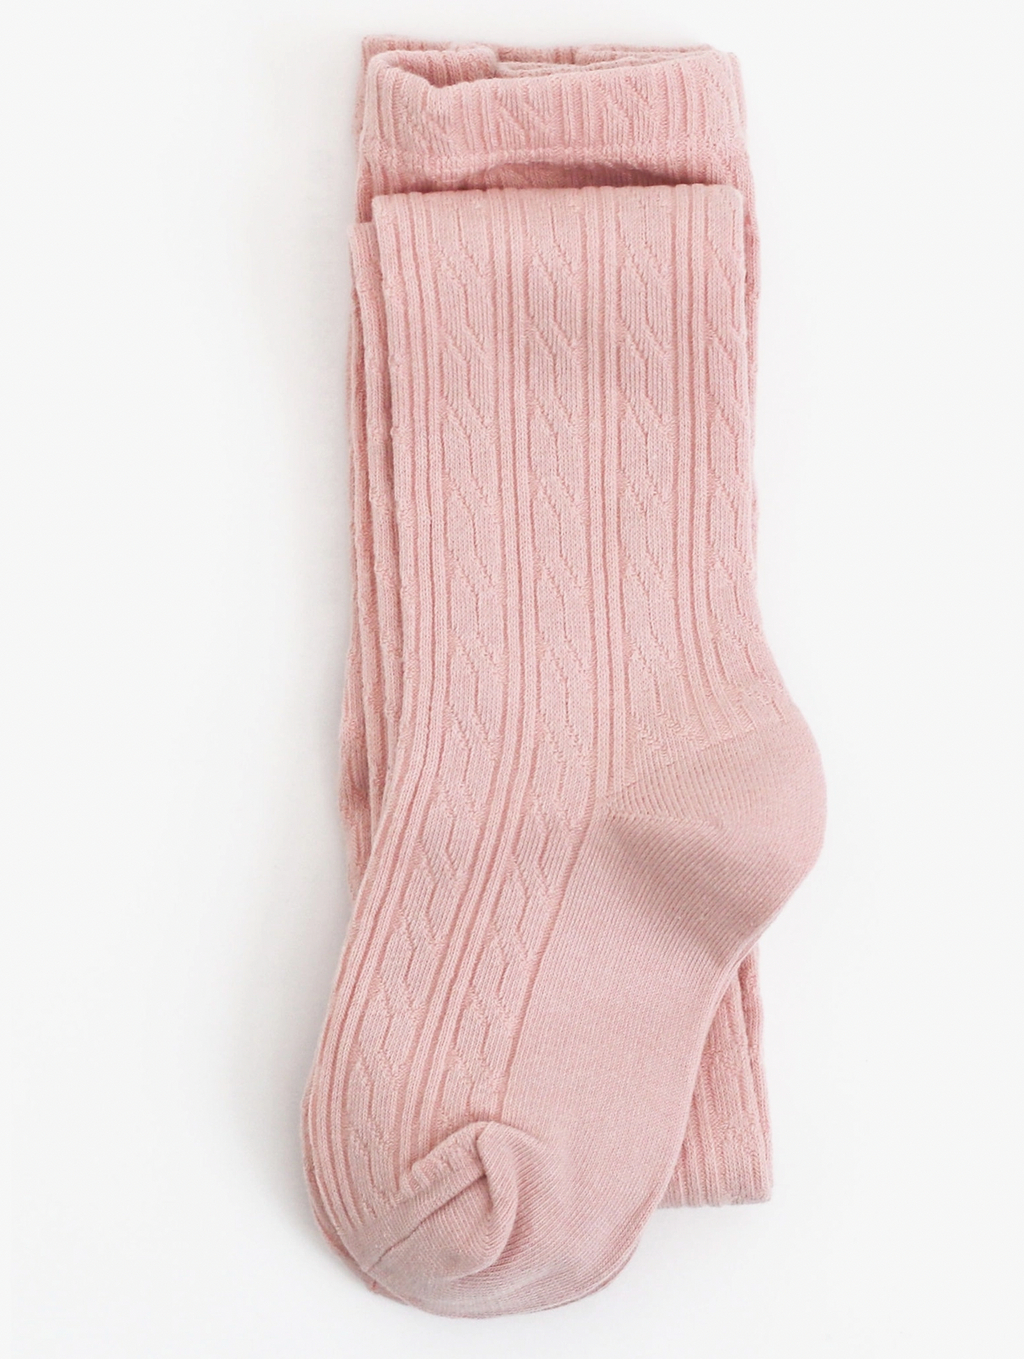 Little Stocking Co. Cable Knit Tights - Multiple Colors!